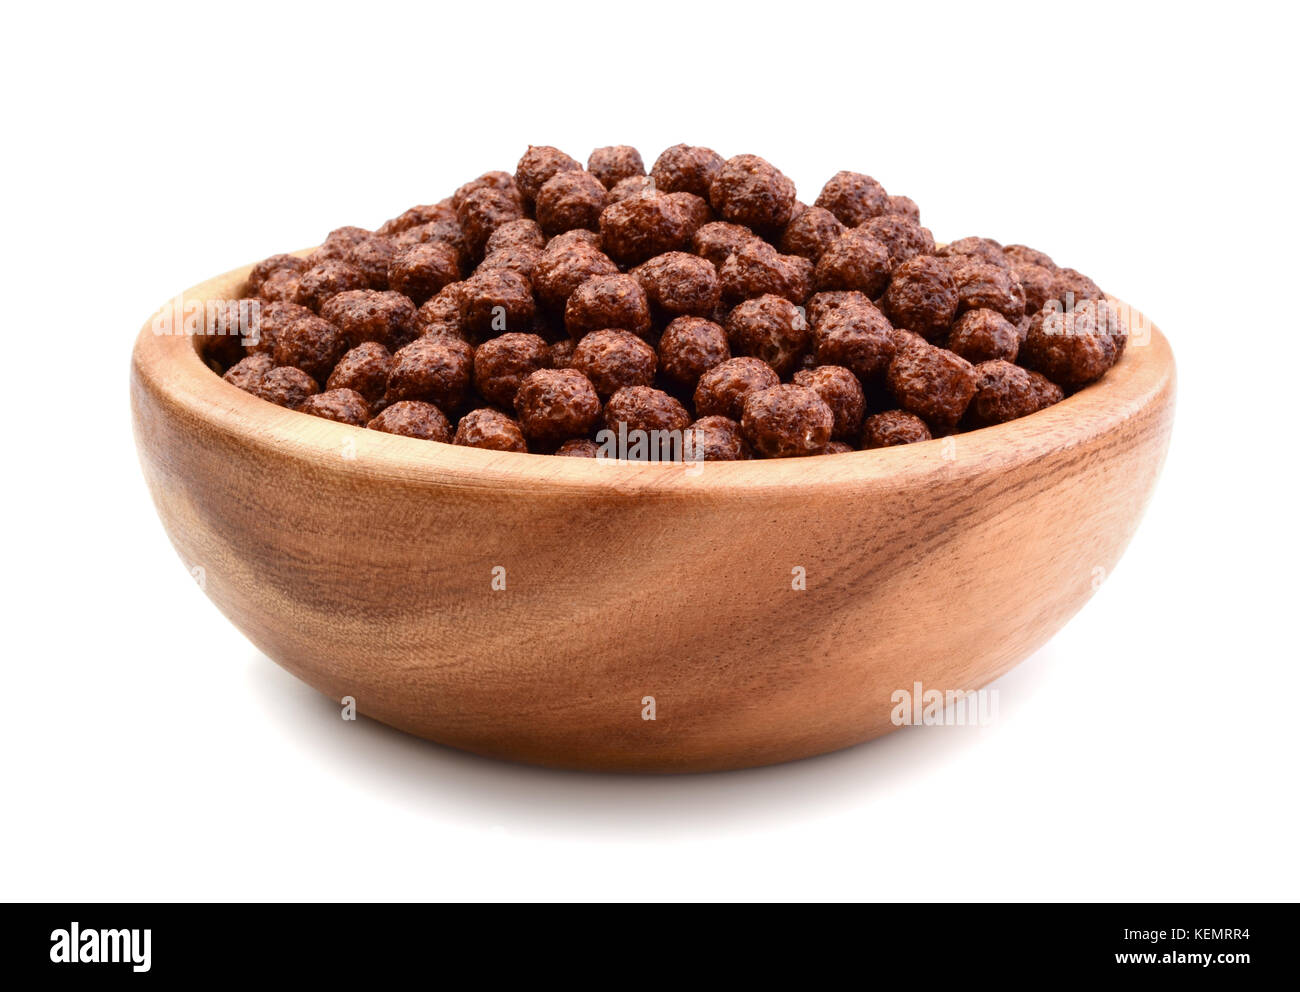 Dry breakfast with chocolate in a wooden bowl isolated on white Stock Photo